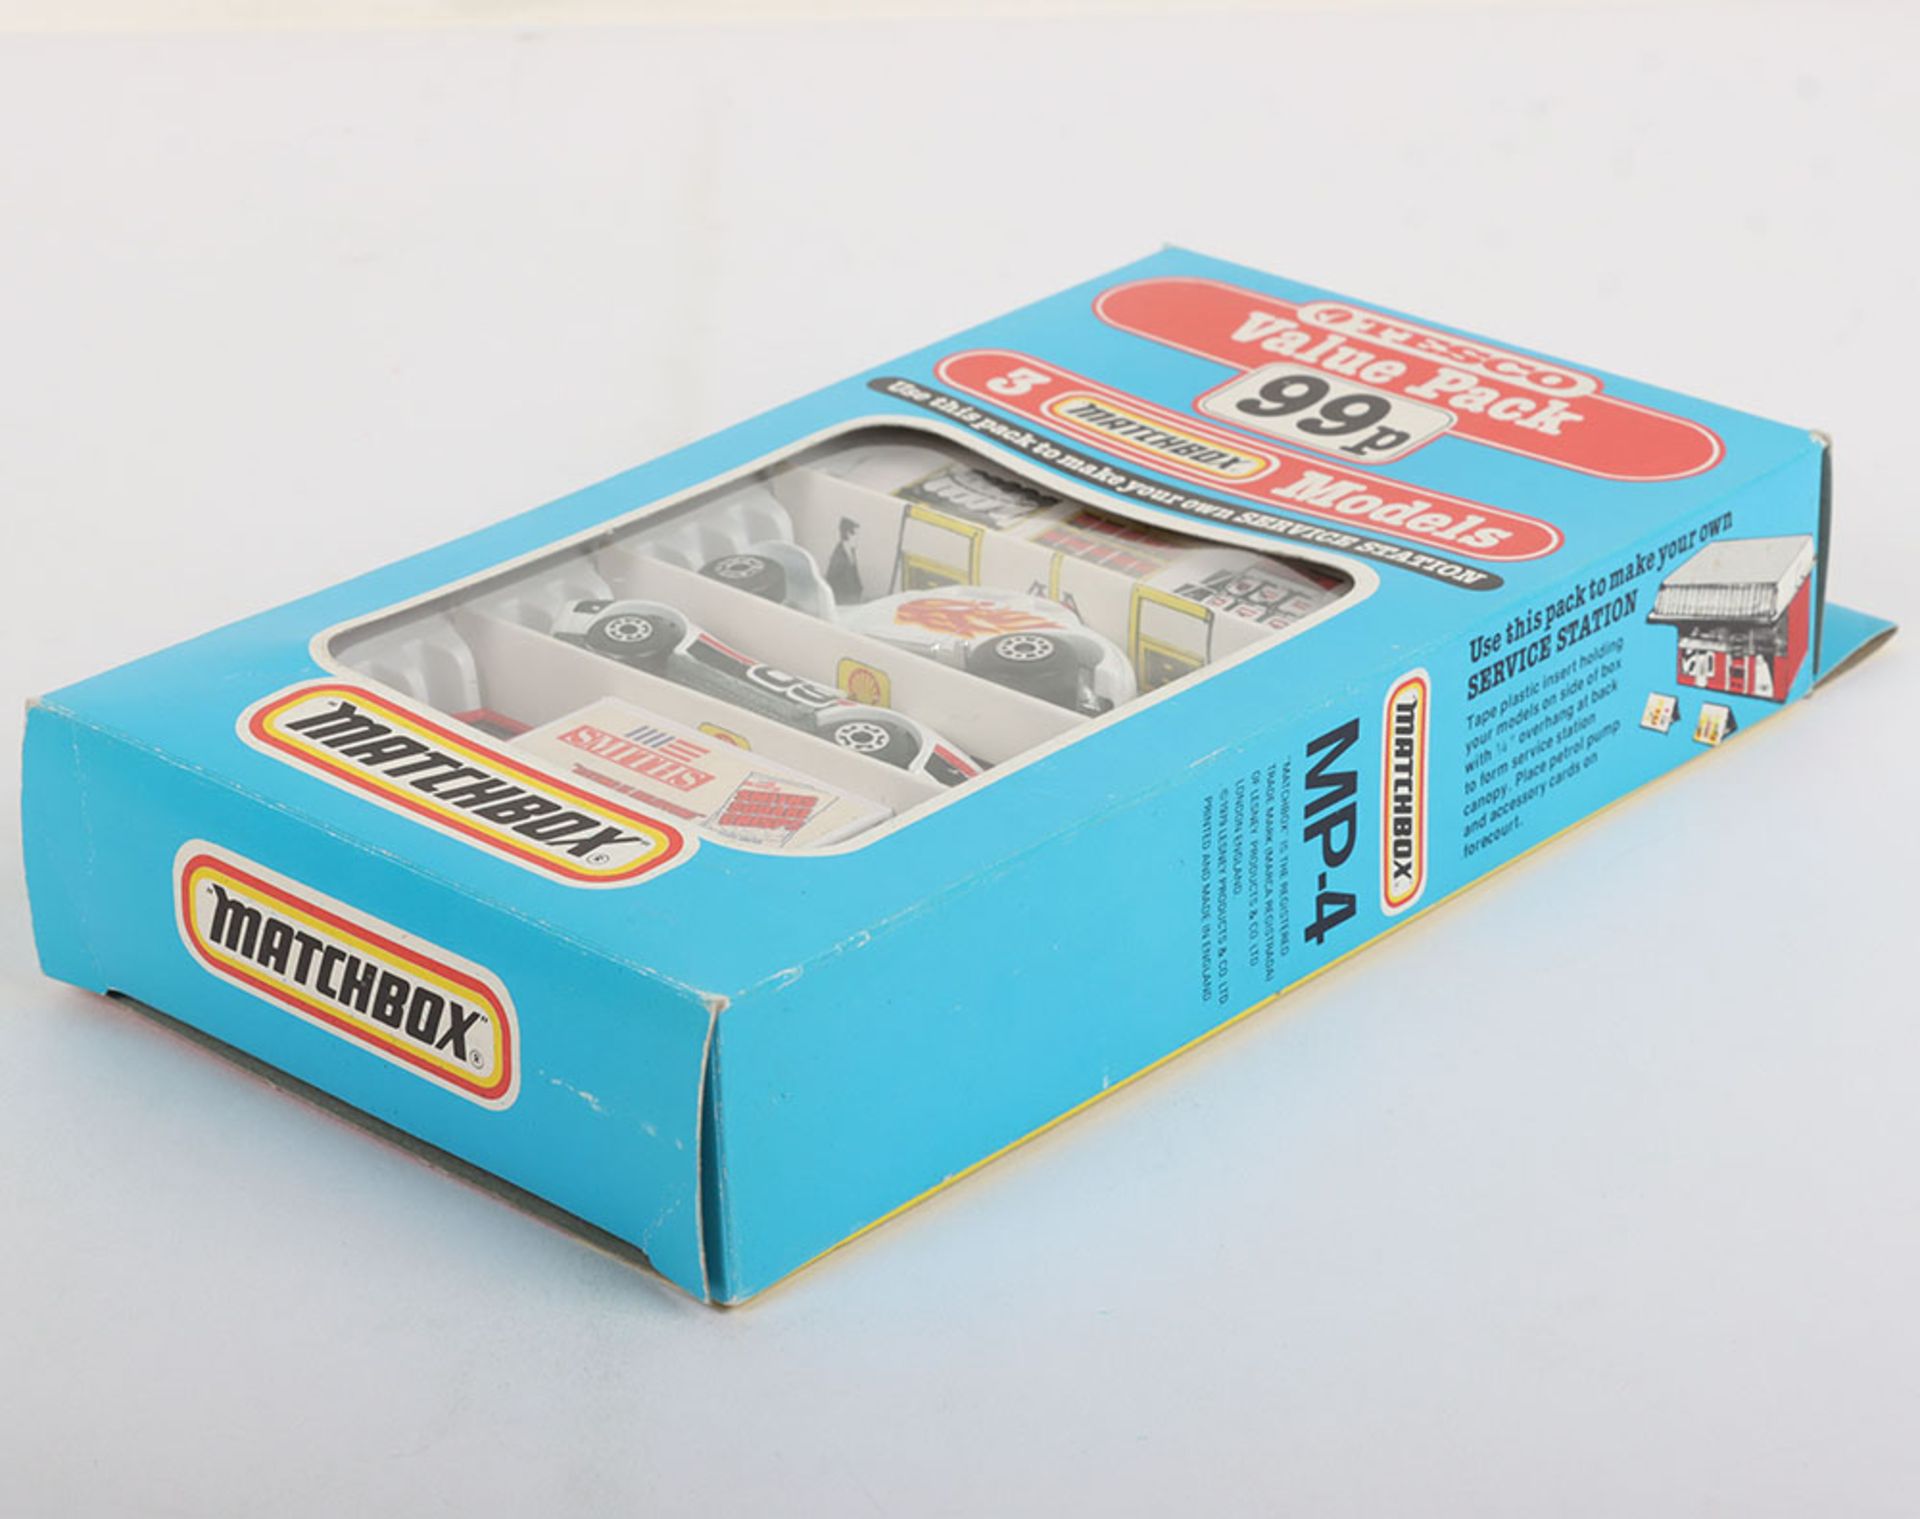 Matchbox Superfast MP-4 Tesco Value Pack of Three Models - Image 4 of 6